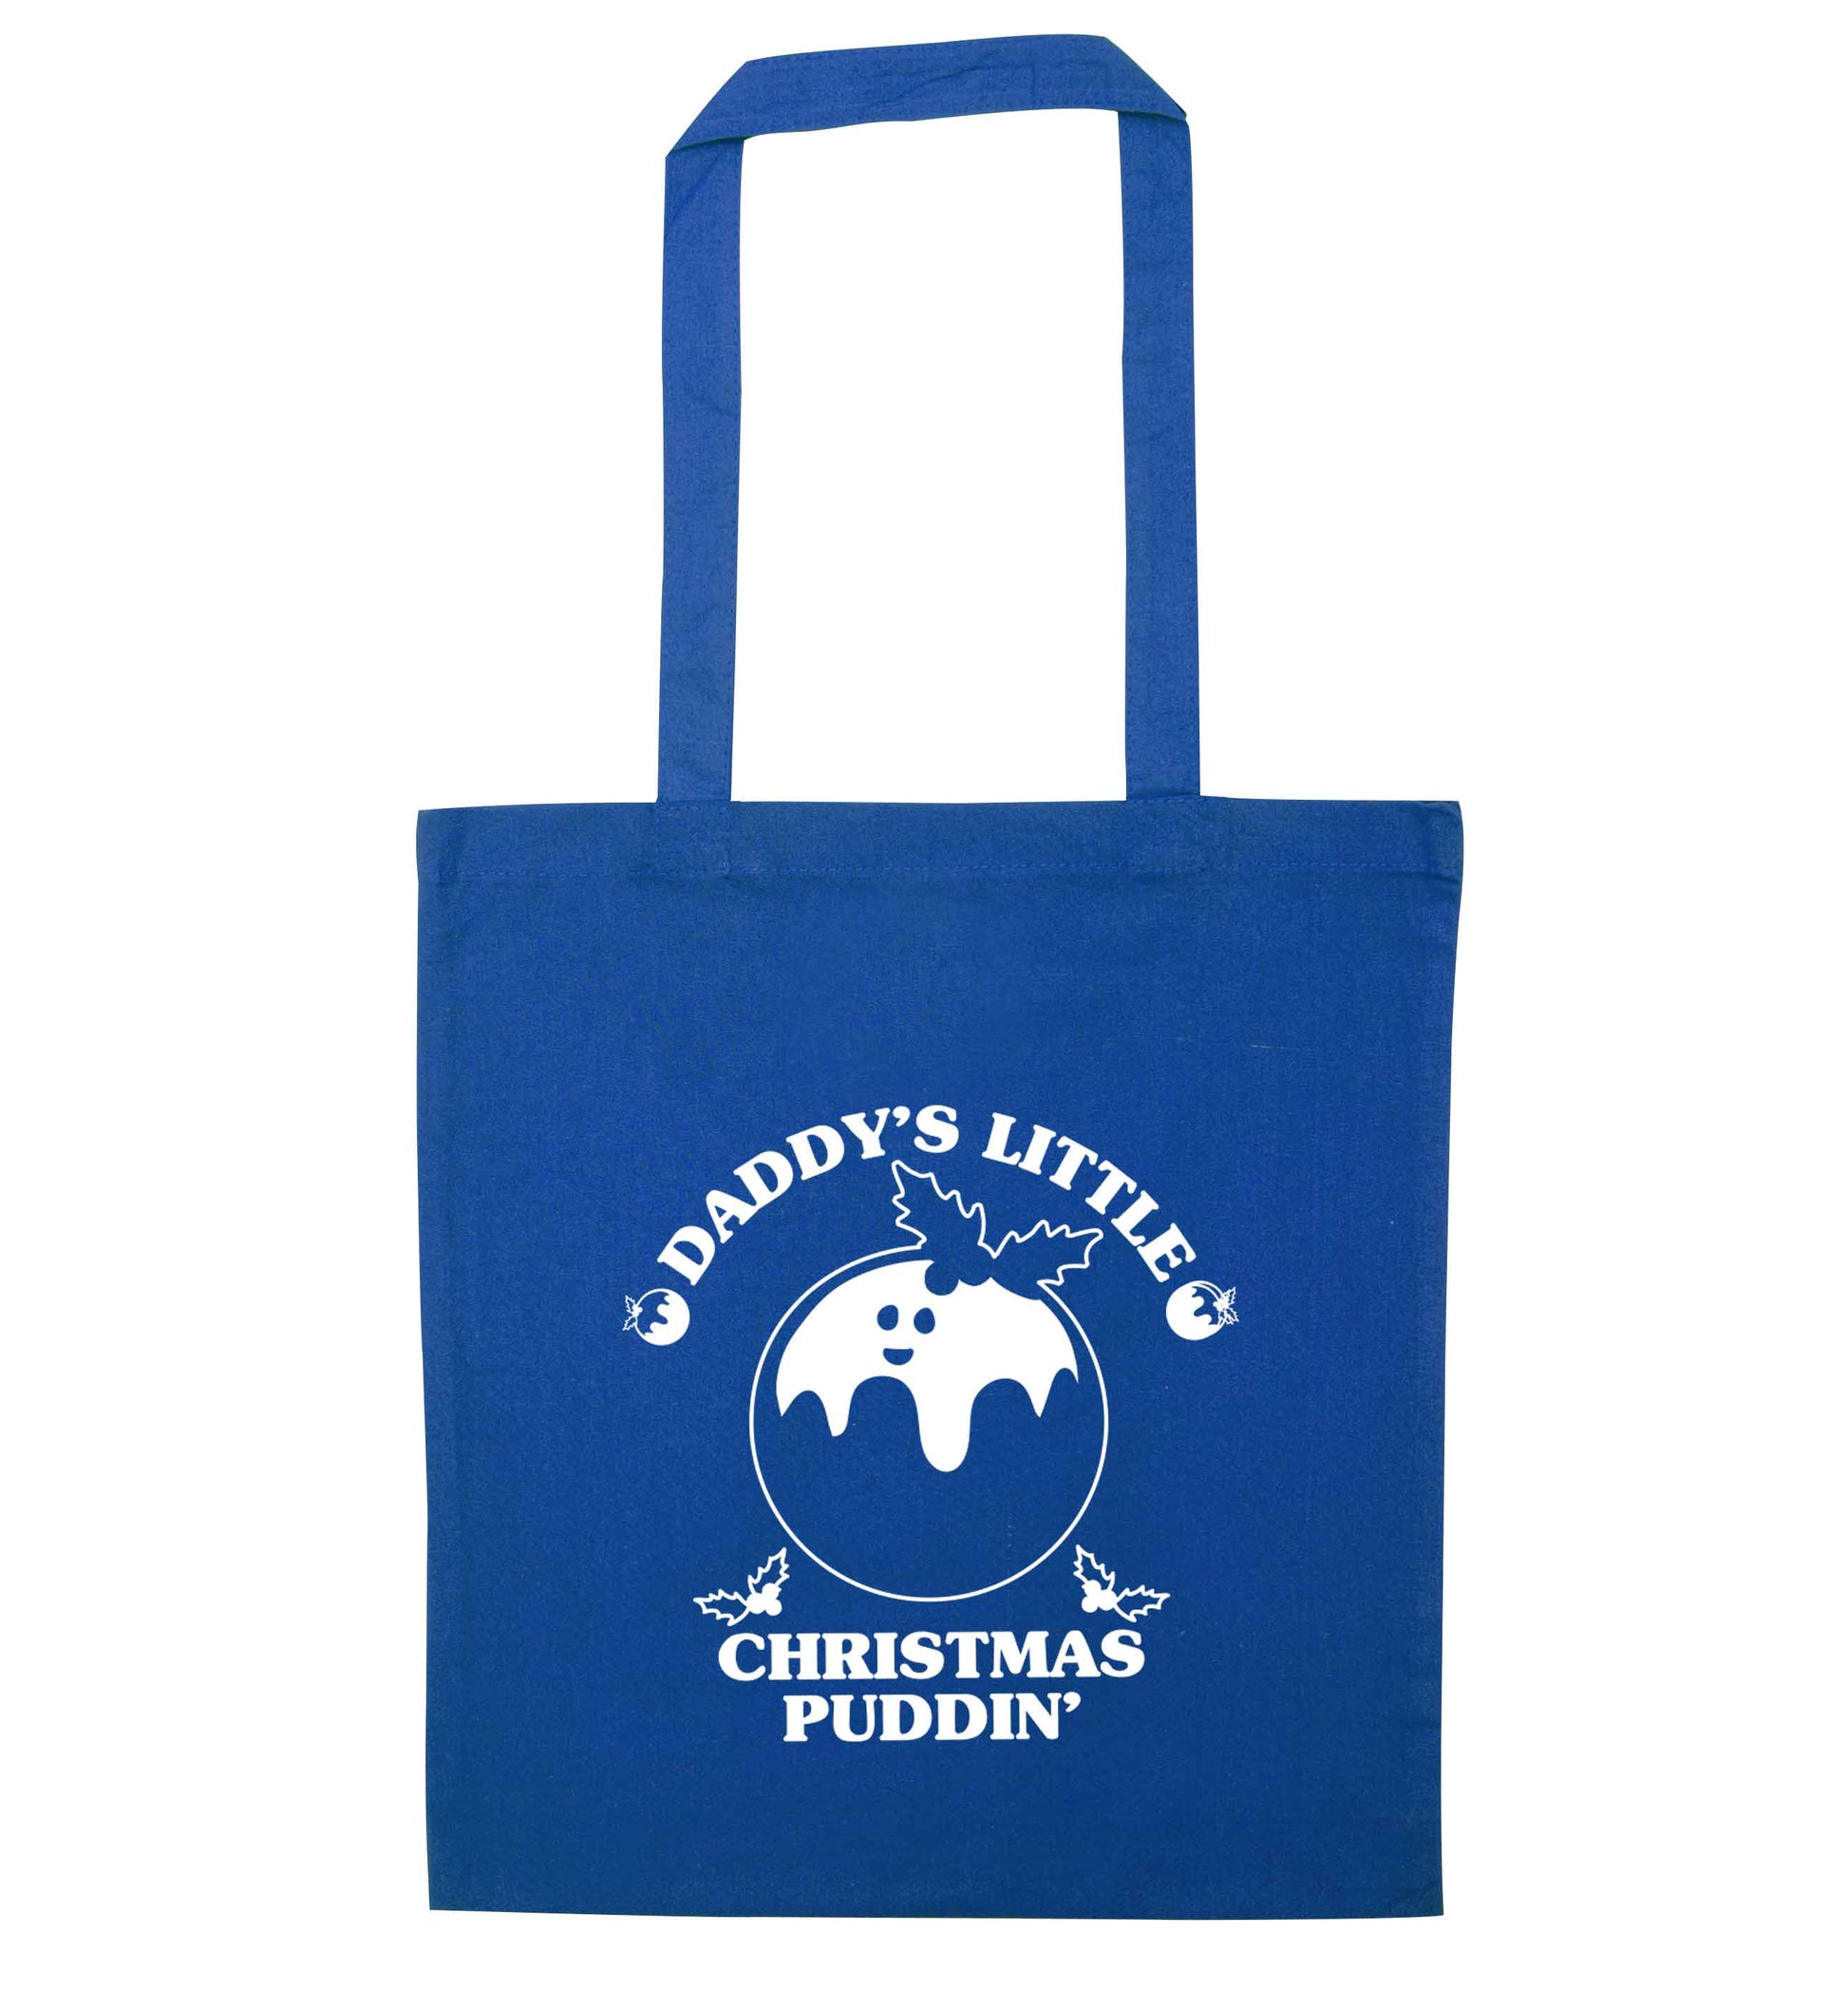 Daddy's little Christmas puddin' blue tote bag